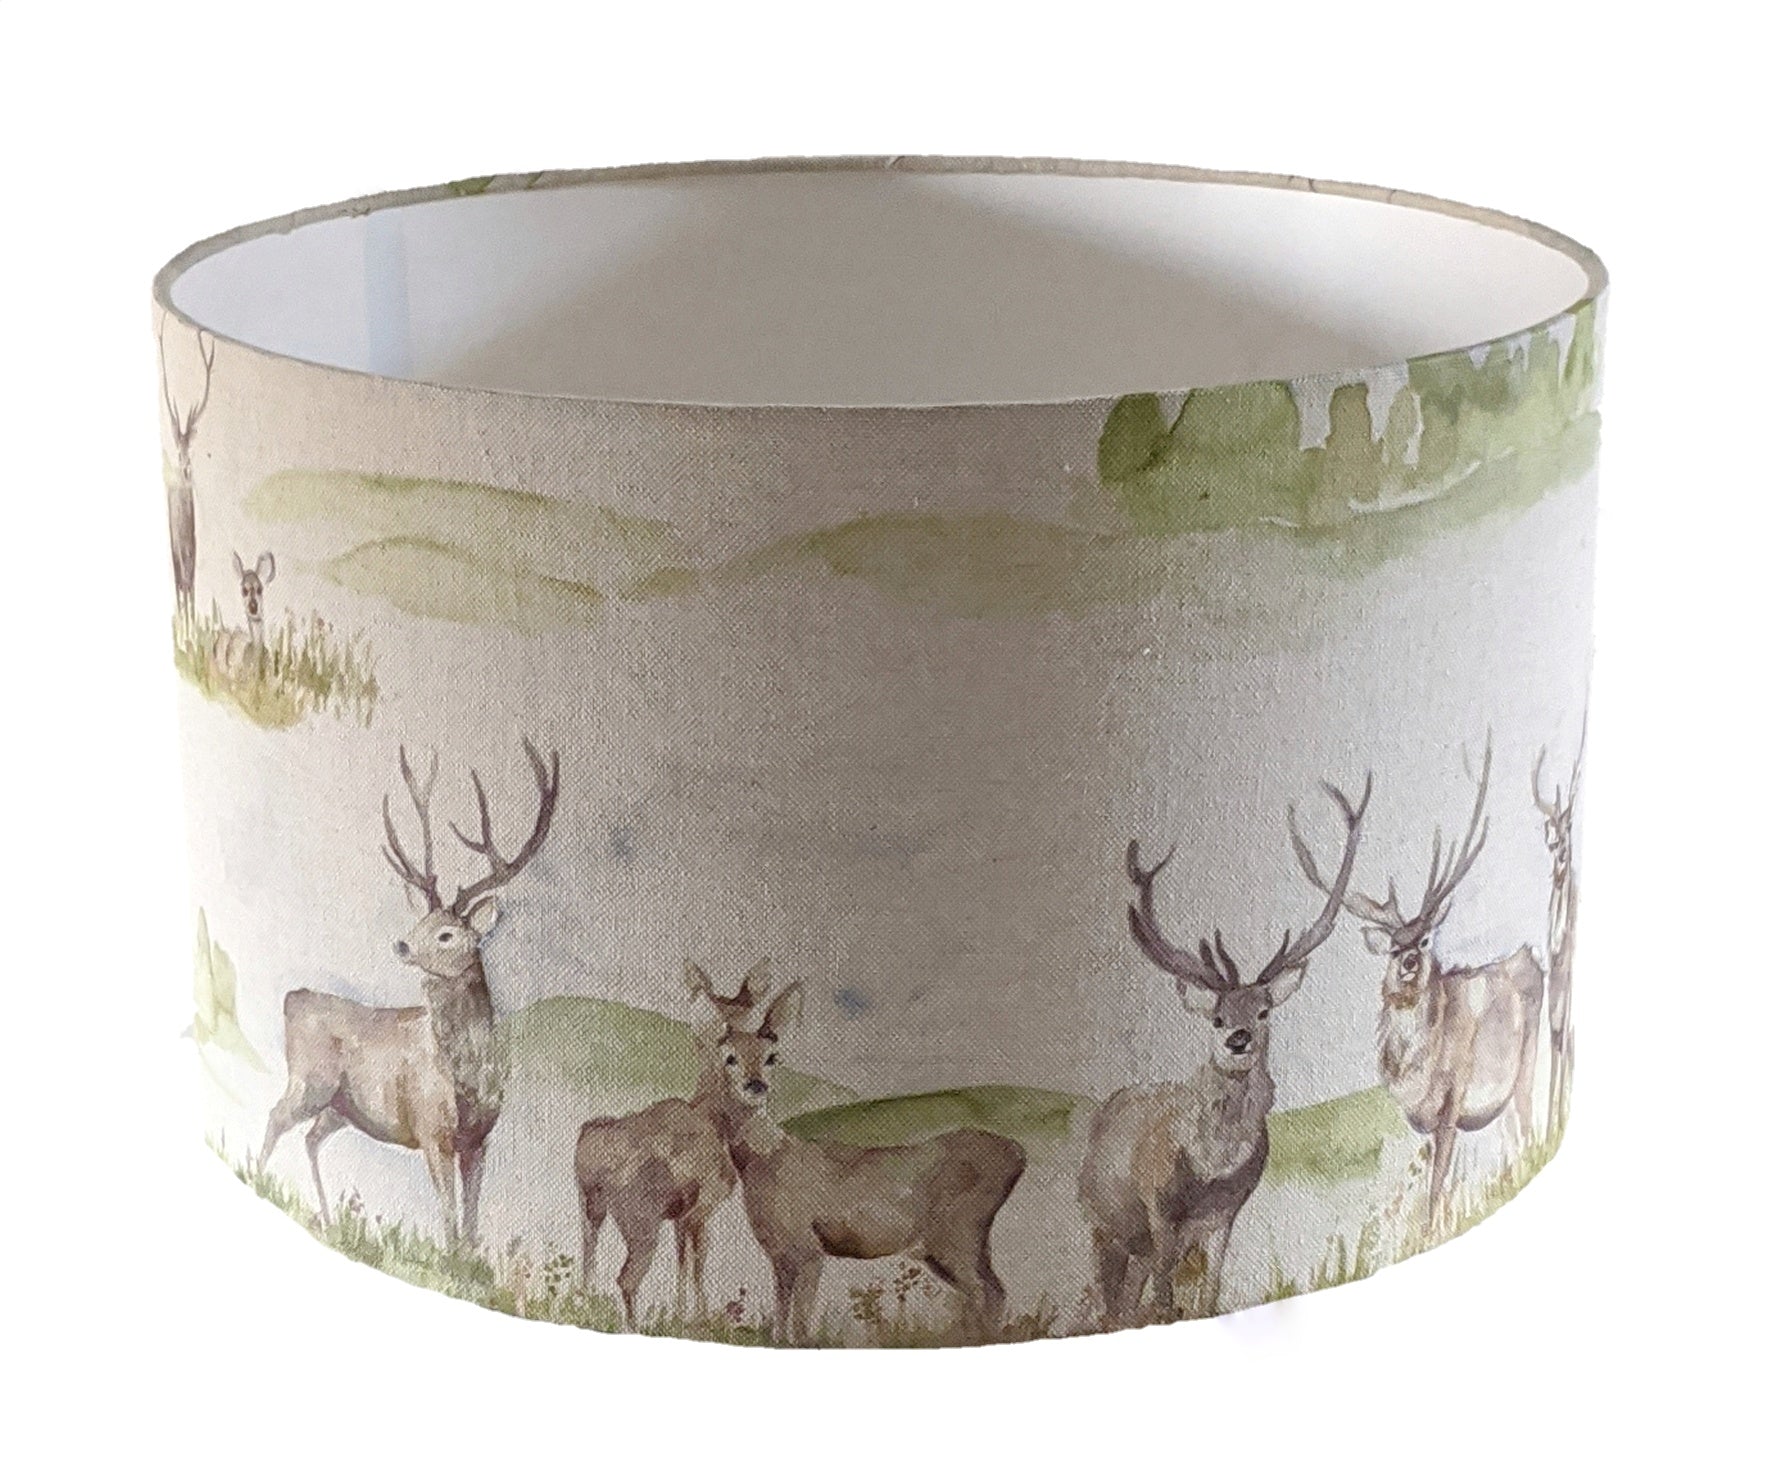 Voyage Stags lampshade for a lamp  - 20cm, 30cm, 40cm